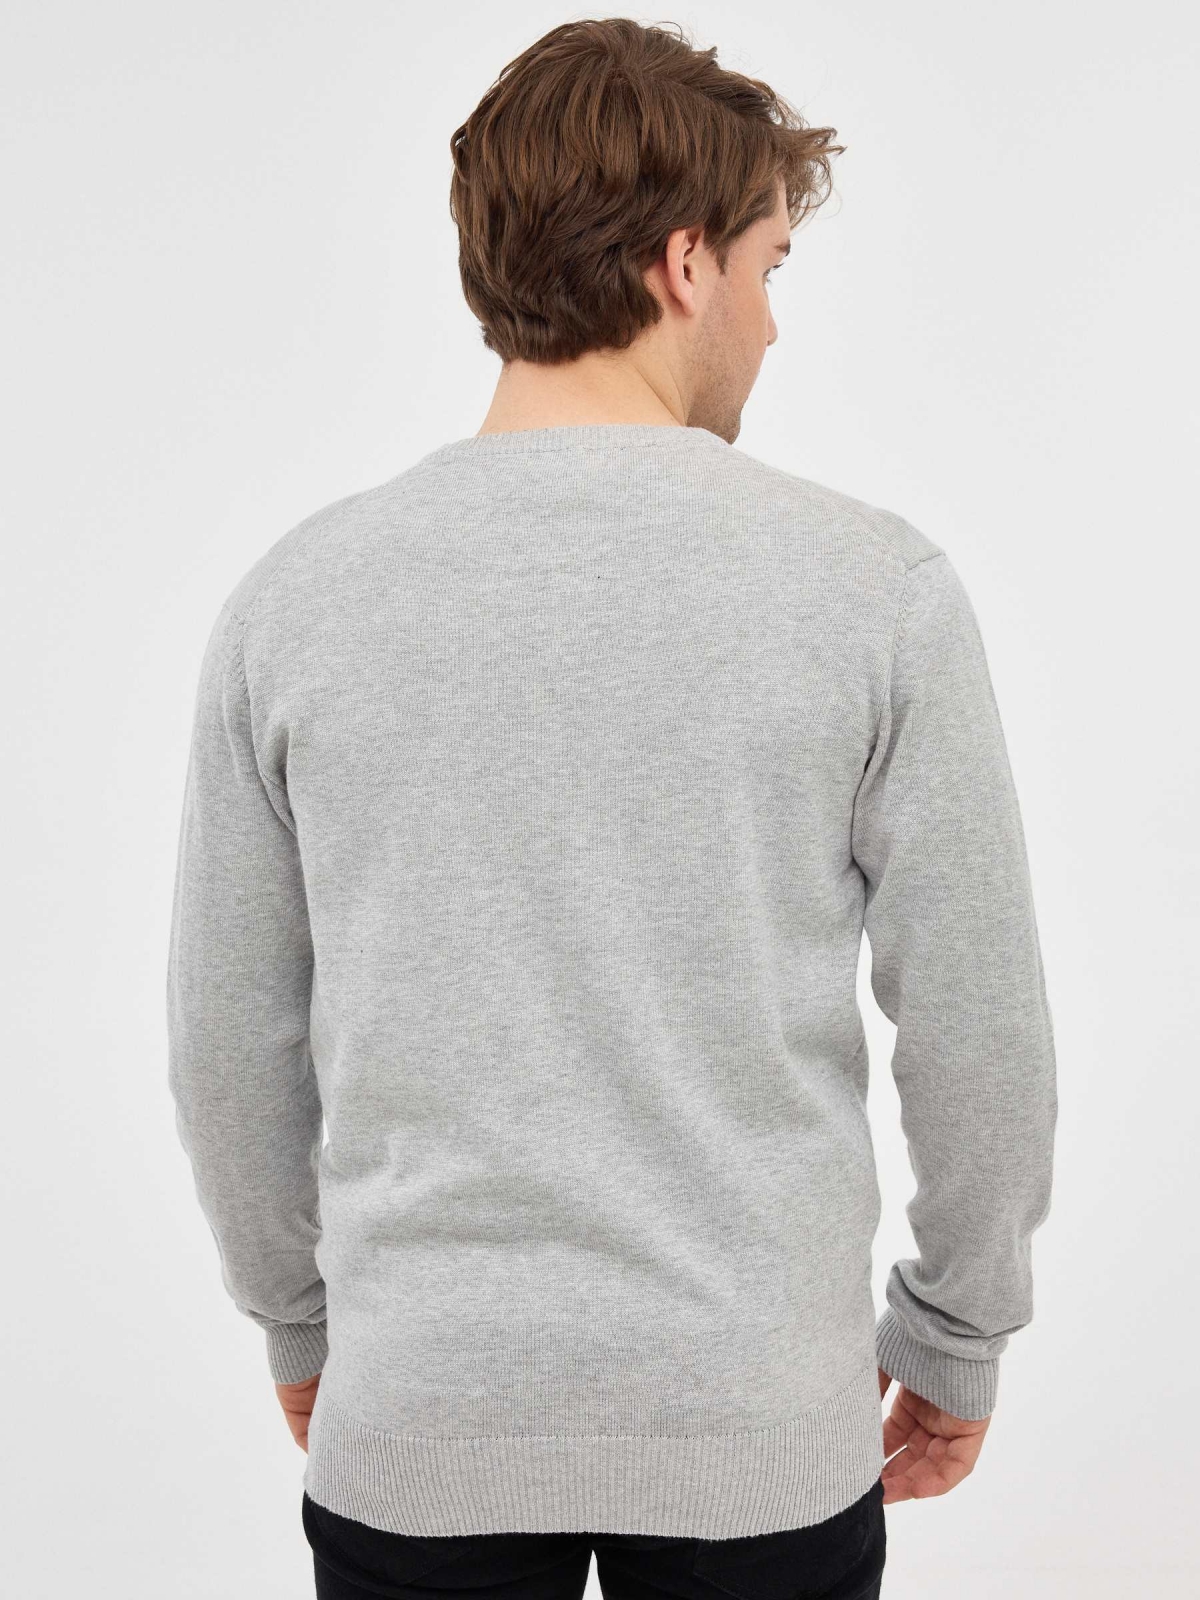 Basic Navy Blue Sweater grey vigore middle back view